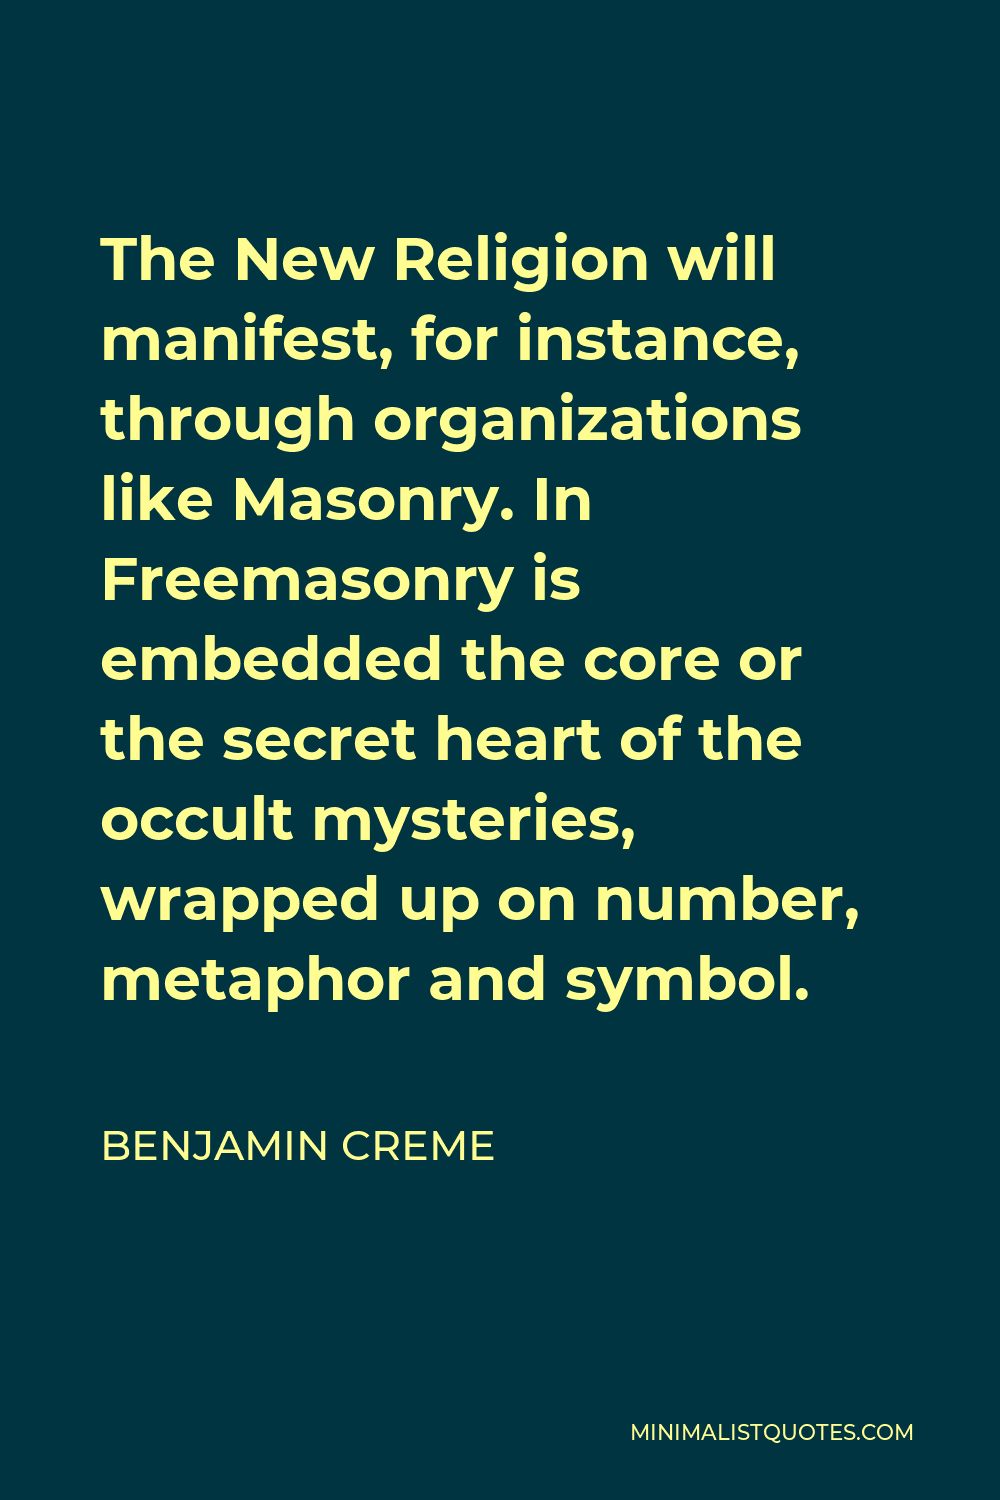 Benjamin Creme Quote - The New Religion will manifest, for instance, through organizations like Masonry. In Freemasonry is embedded the core or the secret heart of the occult mysteries, wrapped up on number, metaphor and symbol.